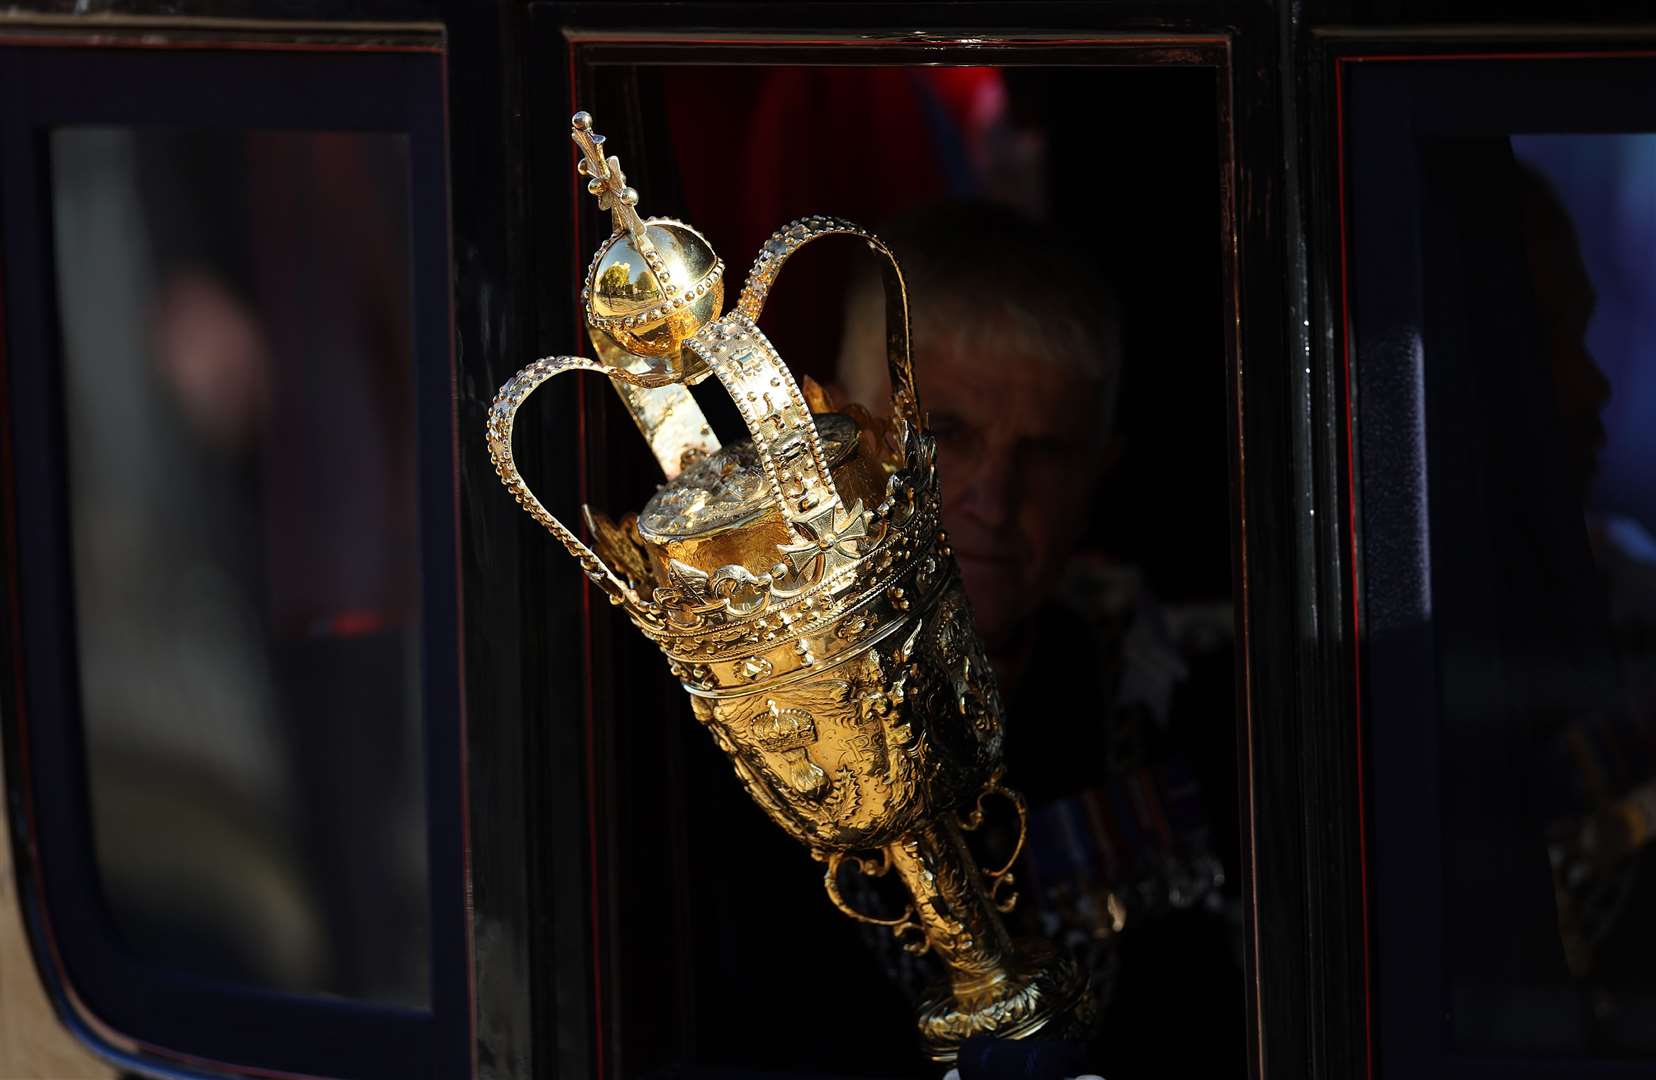 The Mace was carried in a horse-drawn carriage outside the Palace of Westminster (Daniel Leal/PA)